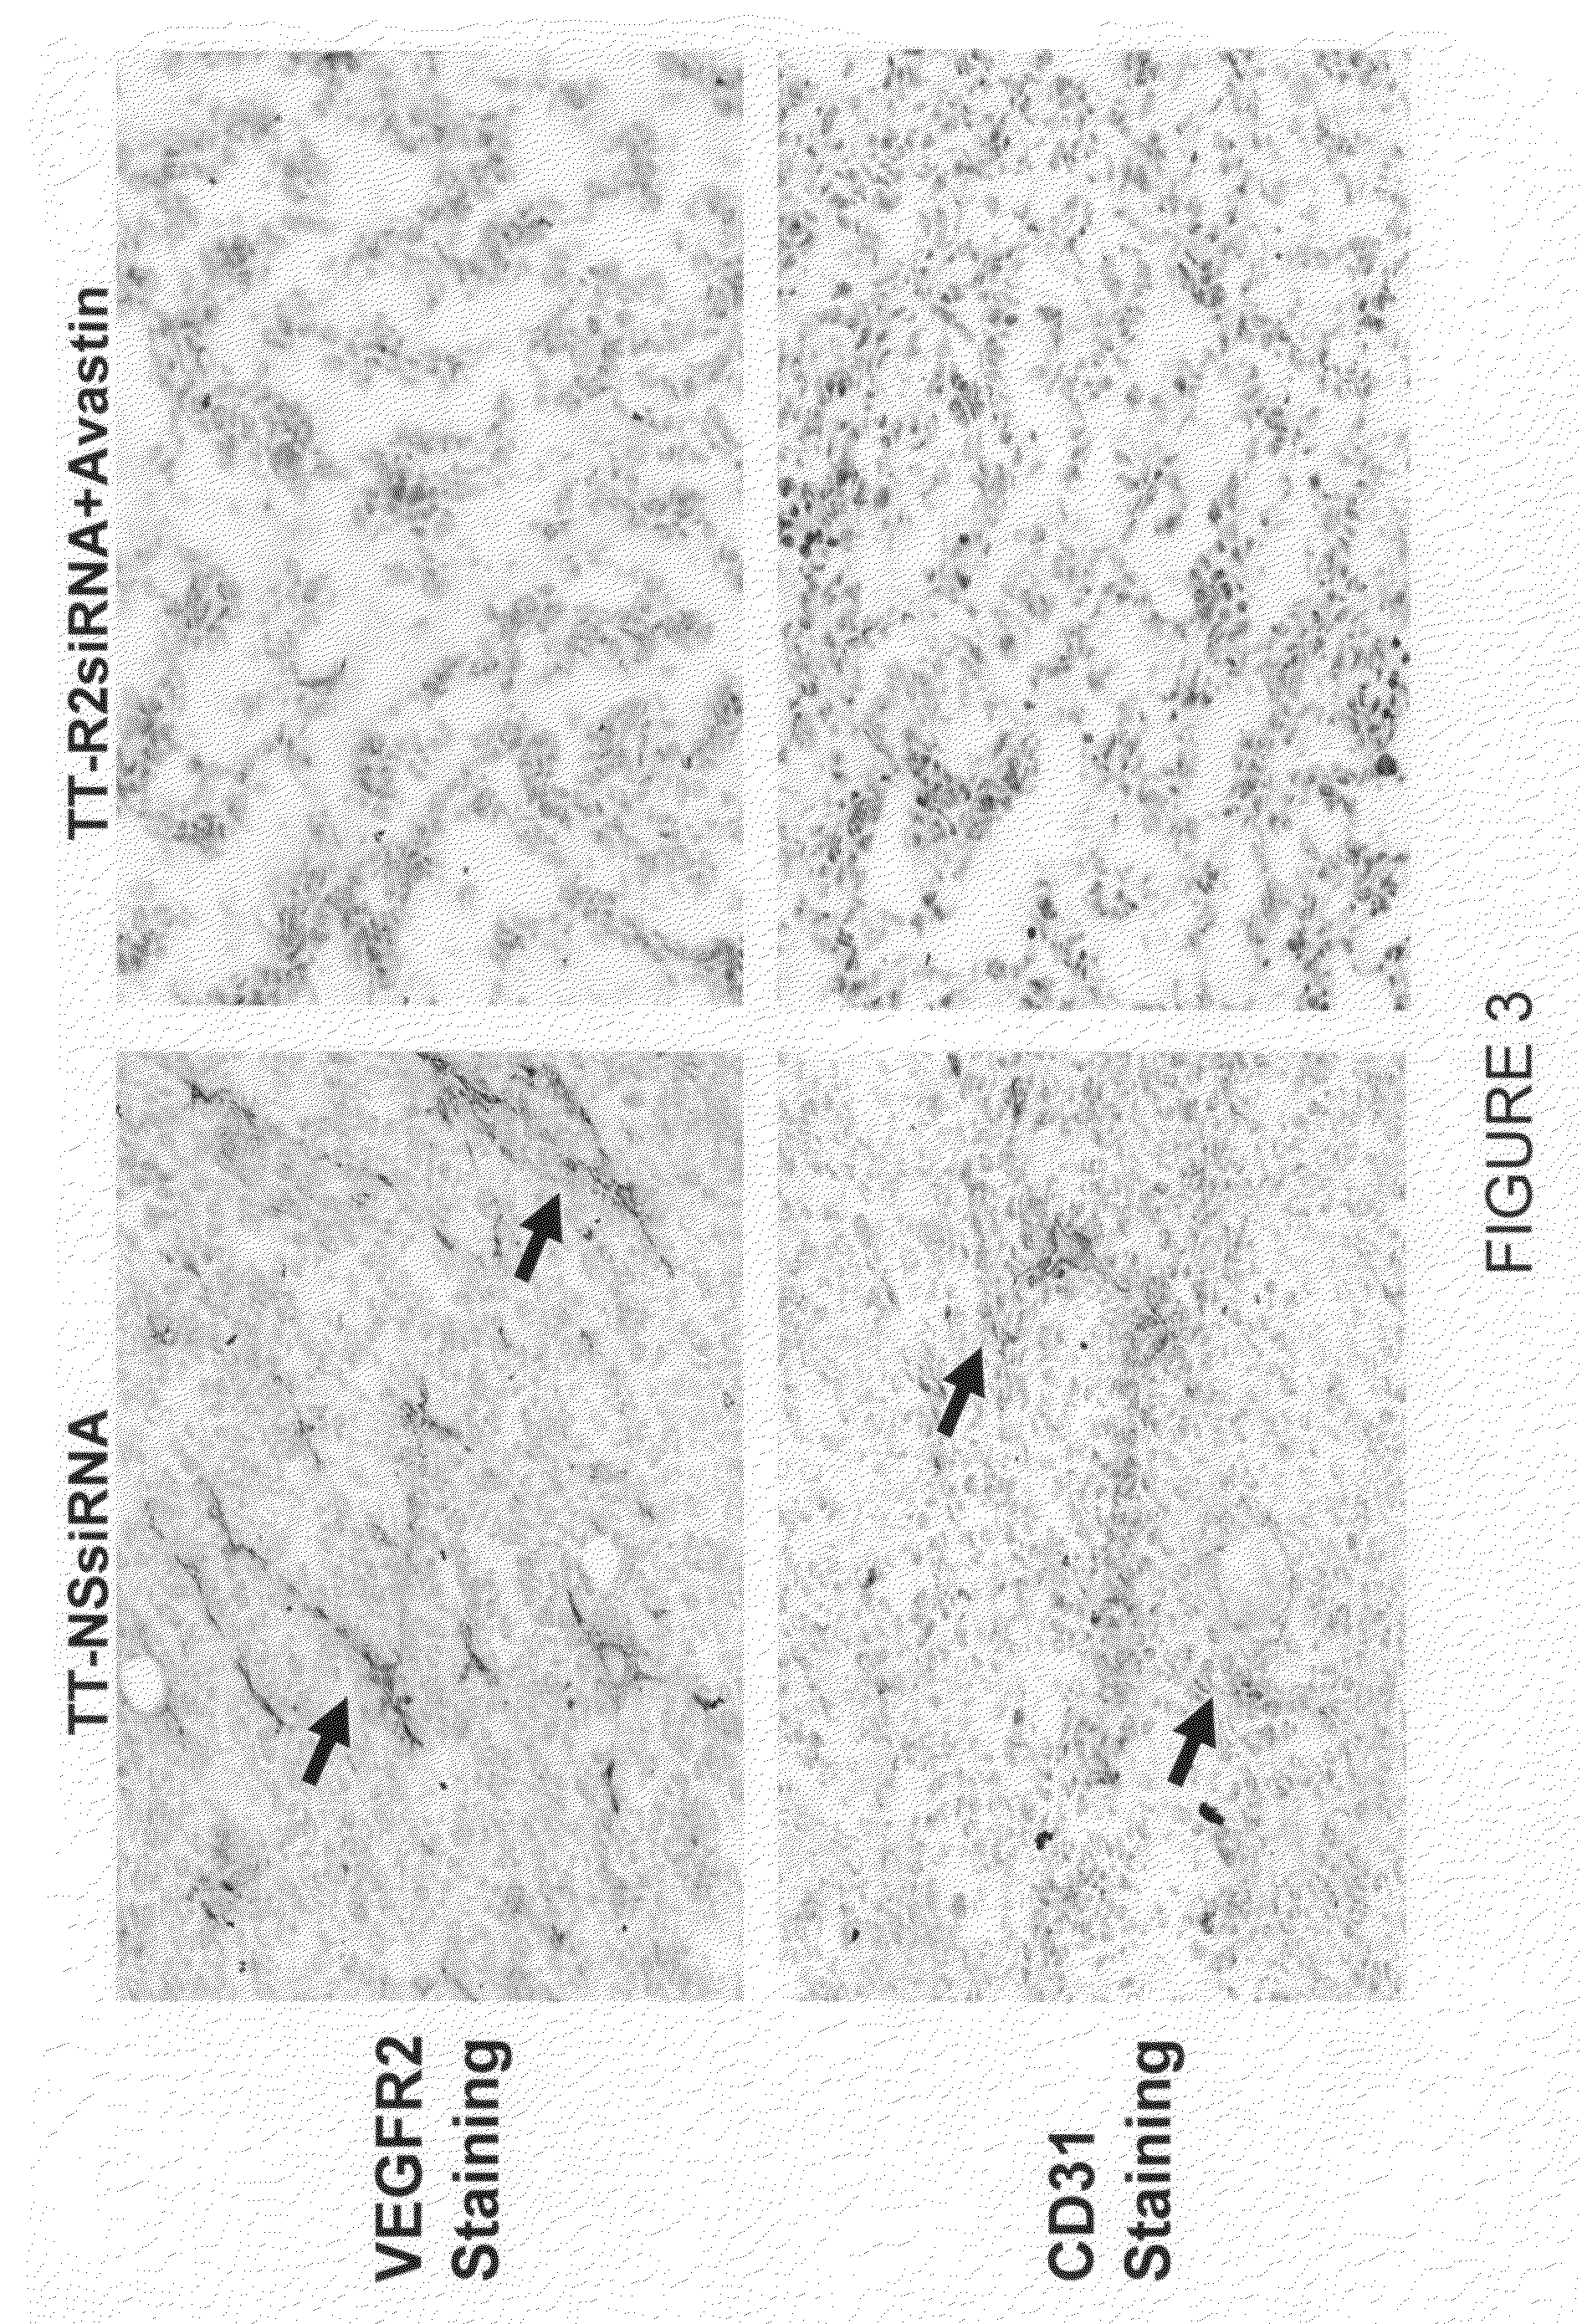 Composition and methods of RNAi therapeutics for treatment of cancer and other neovascularization diseases